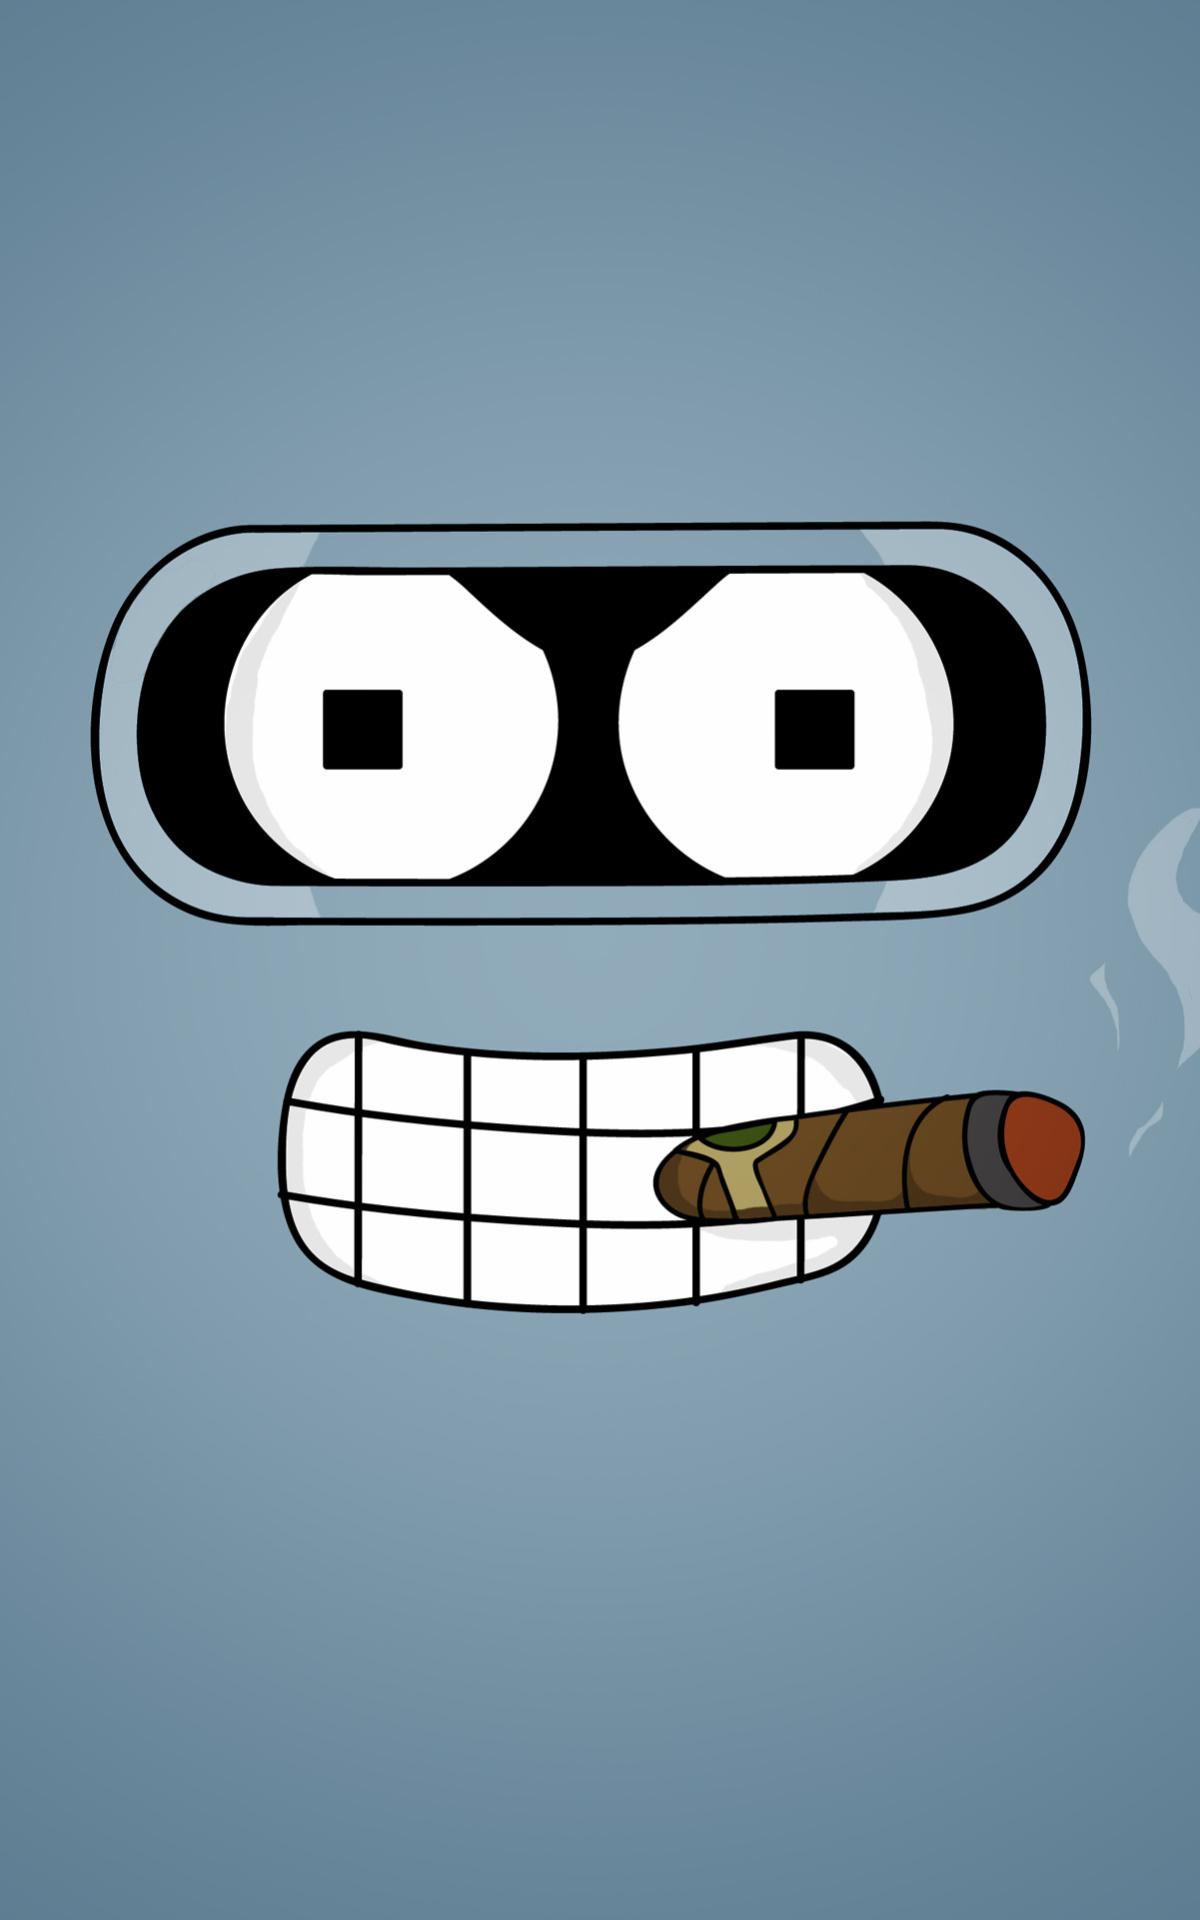 Bender with his cigar